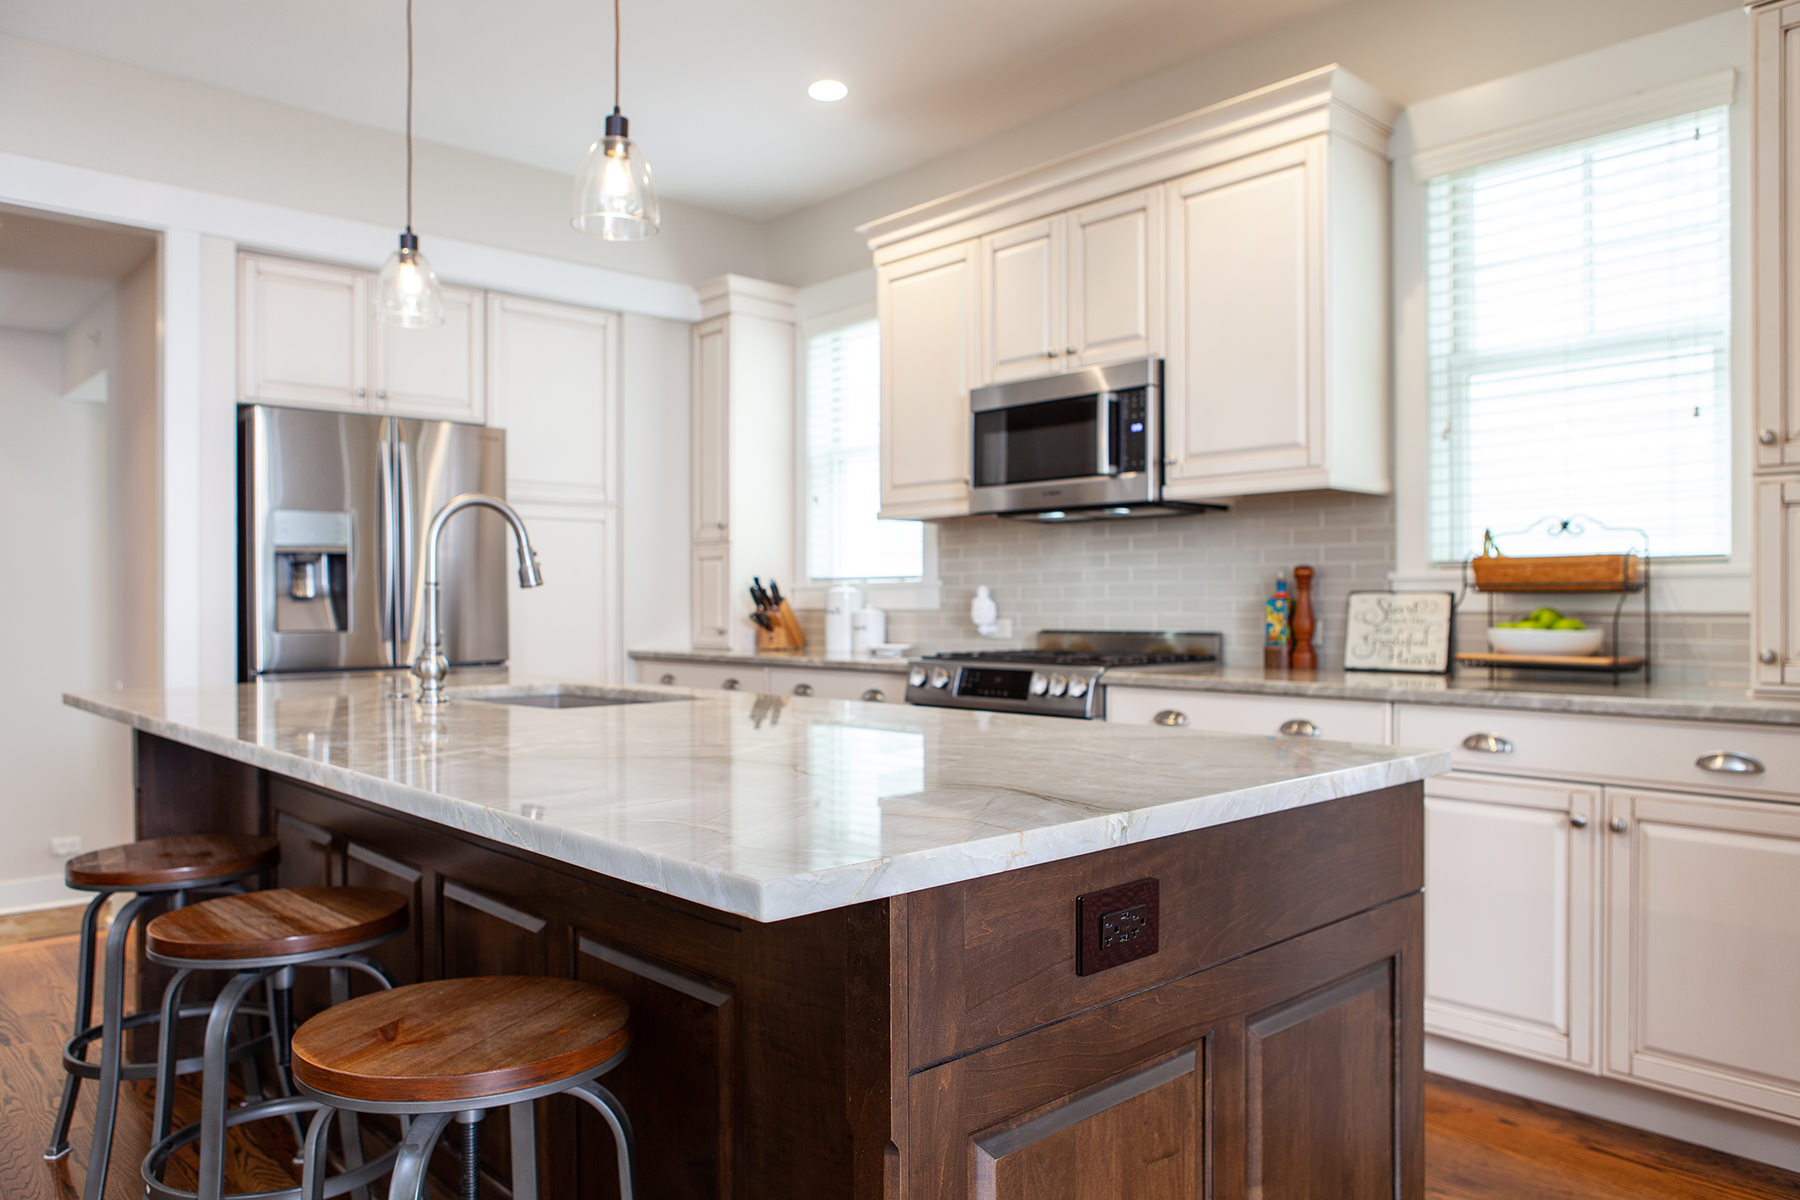 Remodeled kitchen in Libertyville with white cabinets, stainless steel appliances and a dark wood kitchen island.